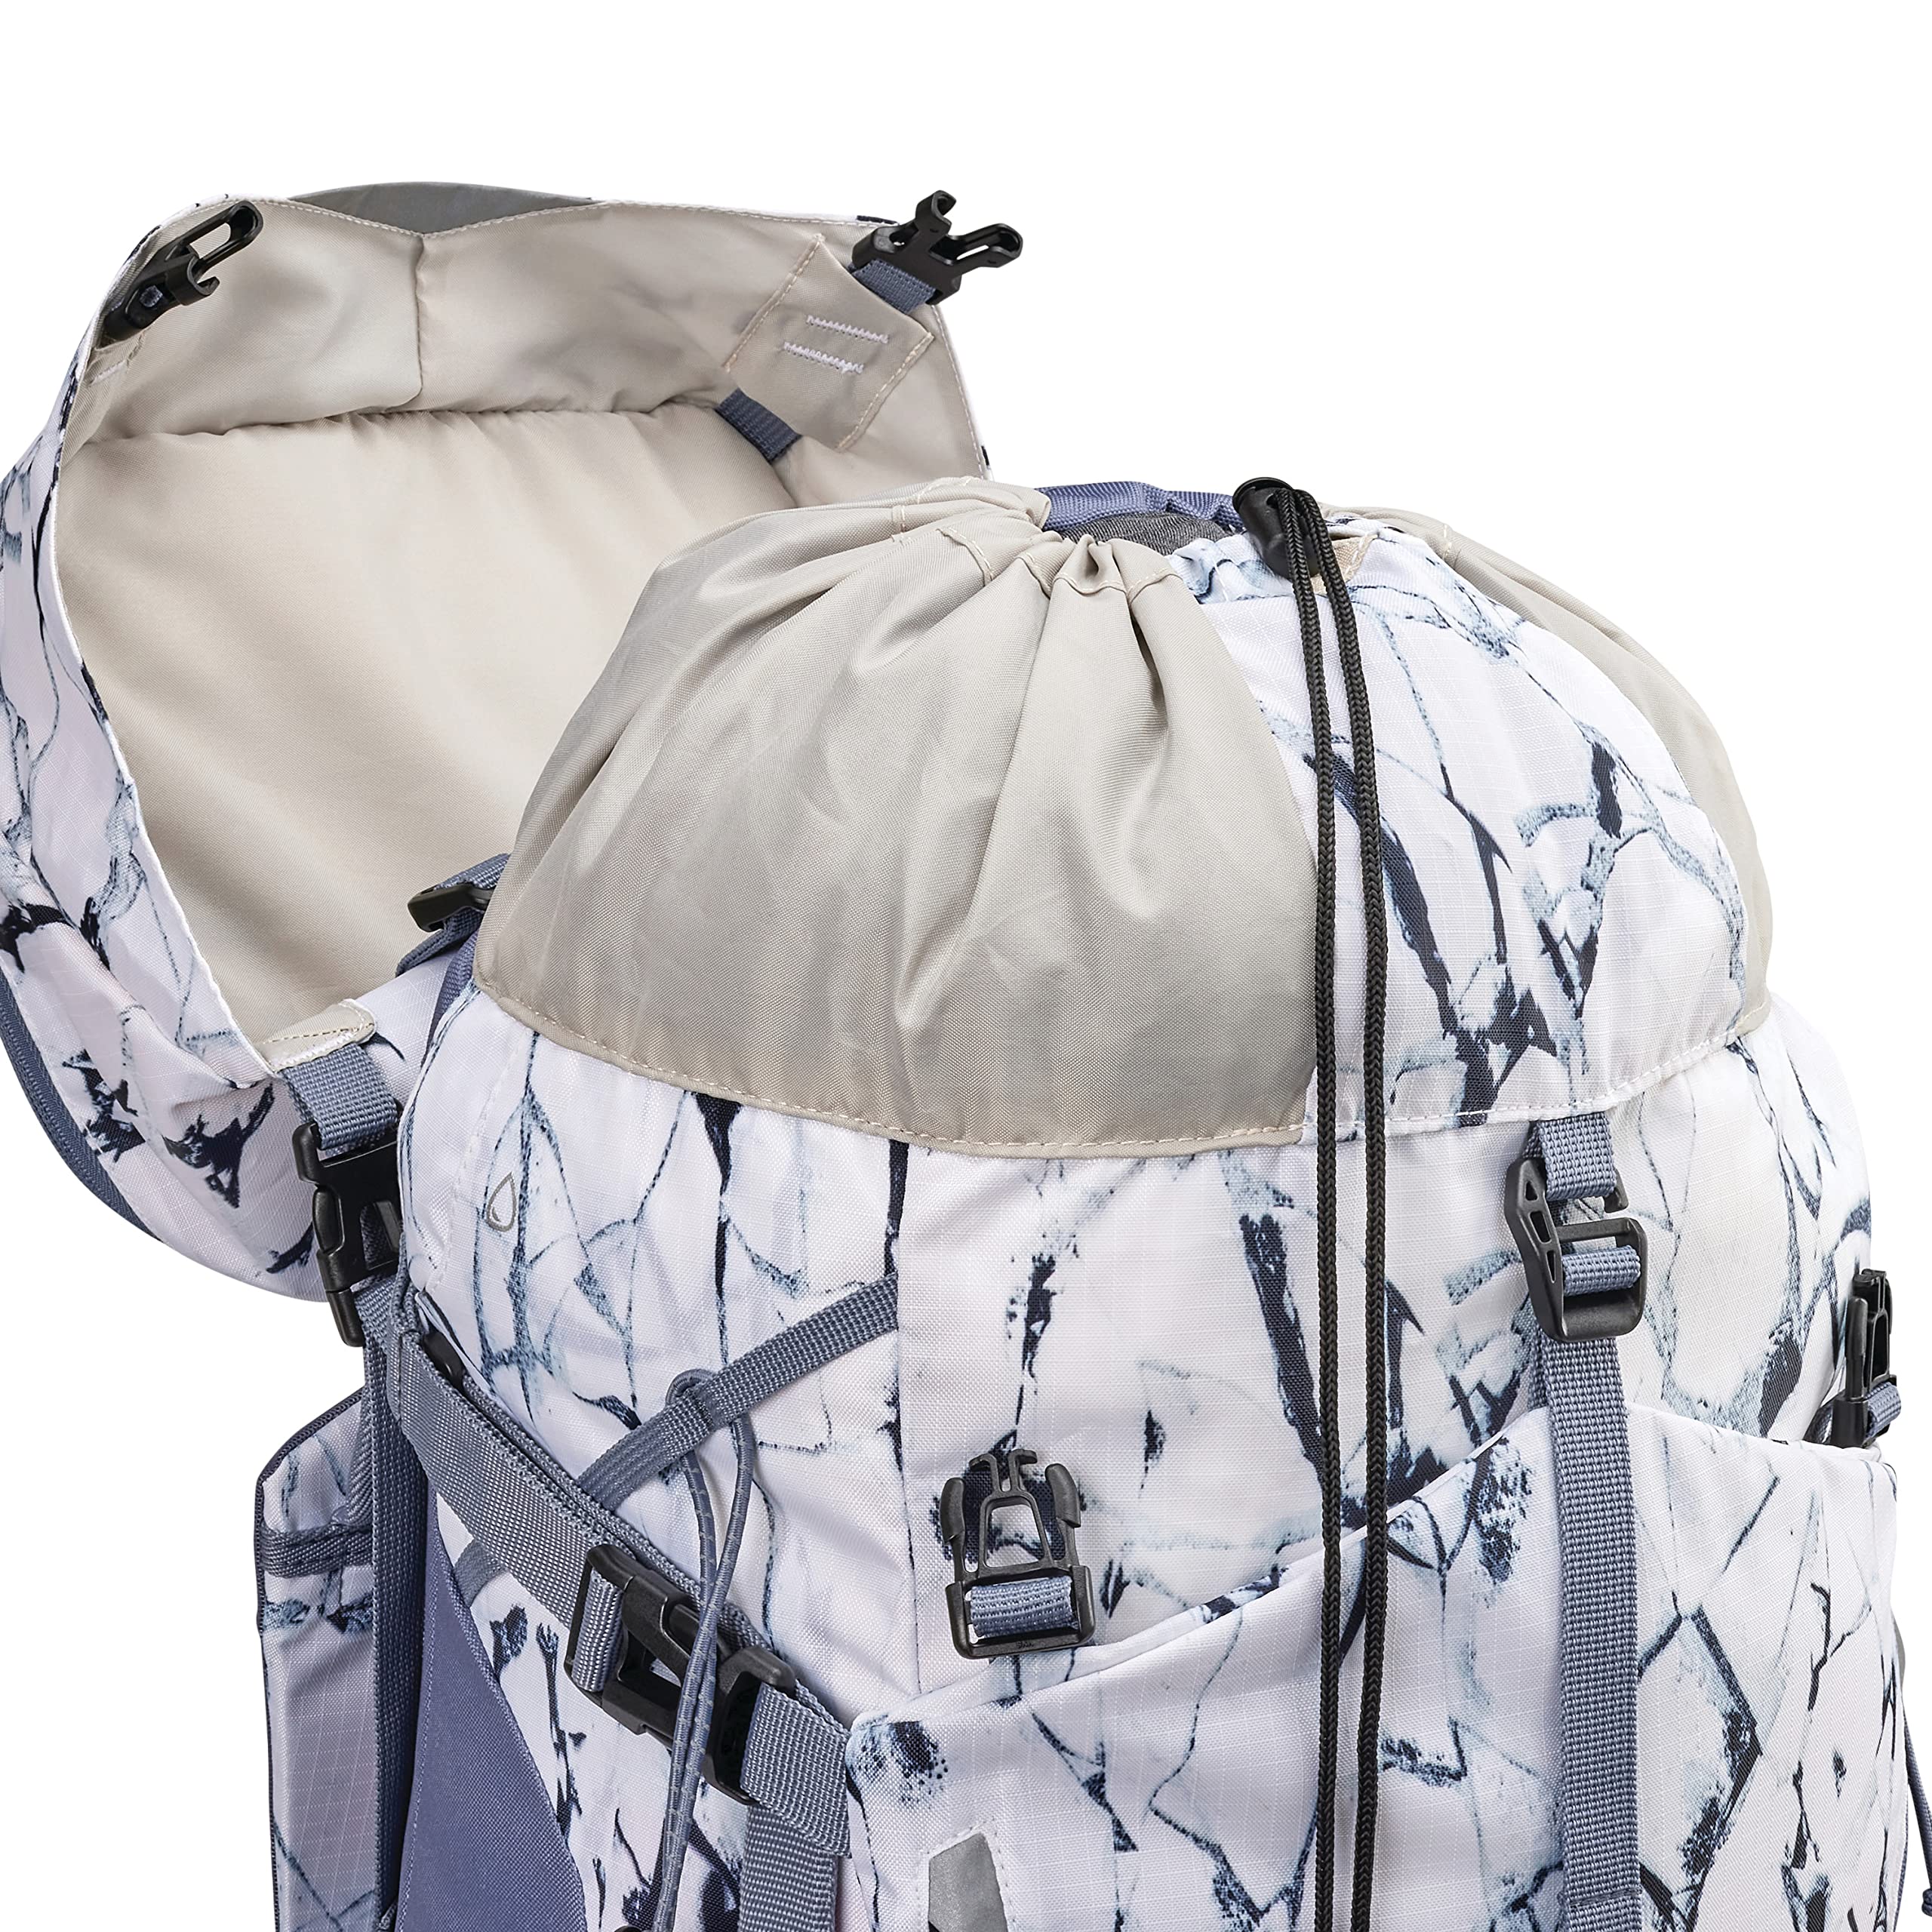 High Sierra Pathway 2.0 Backpack with Hydration Storage Sleeve, for Hiking, Biking, Camping, Traveling, White Cracked Ice/Grey Blue, 60L